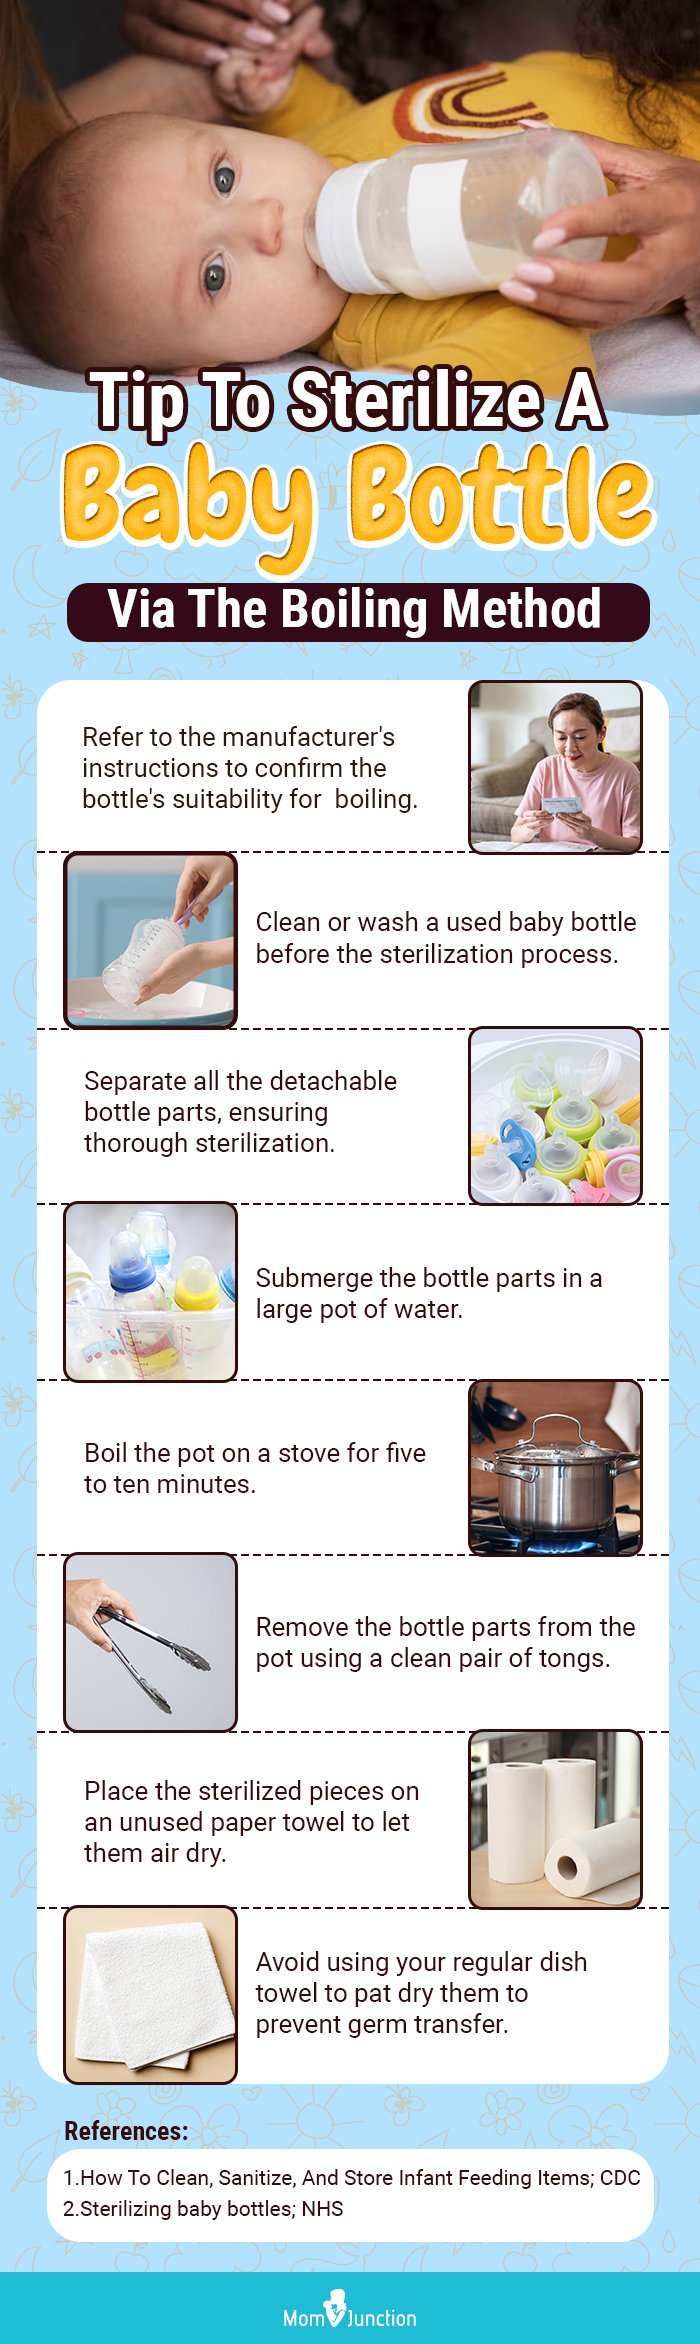 Tip To Sterilize A Baby Bottle Via The Boiling Method (infographic)